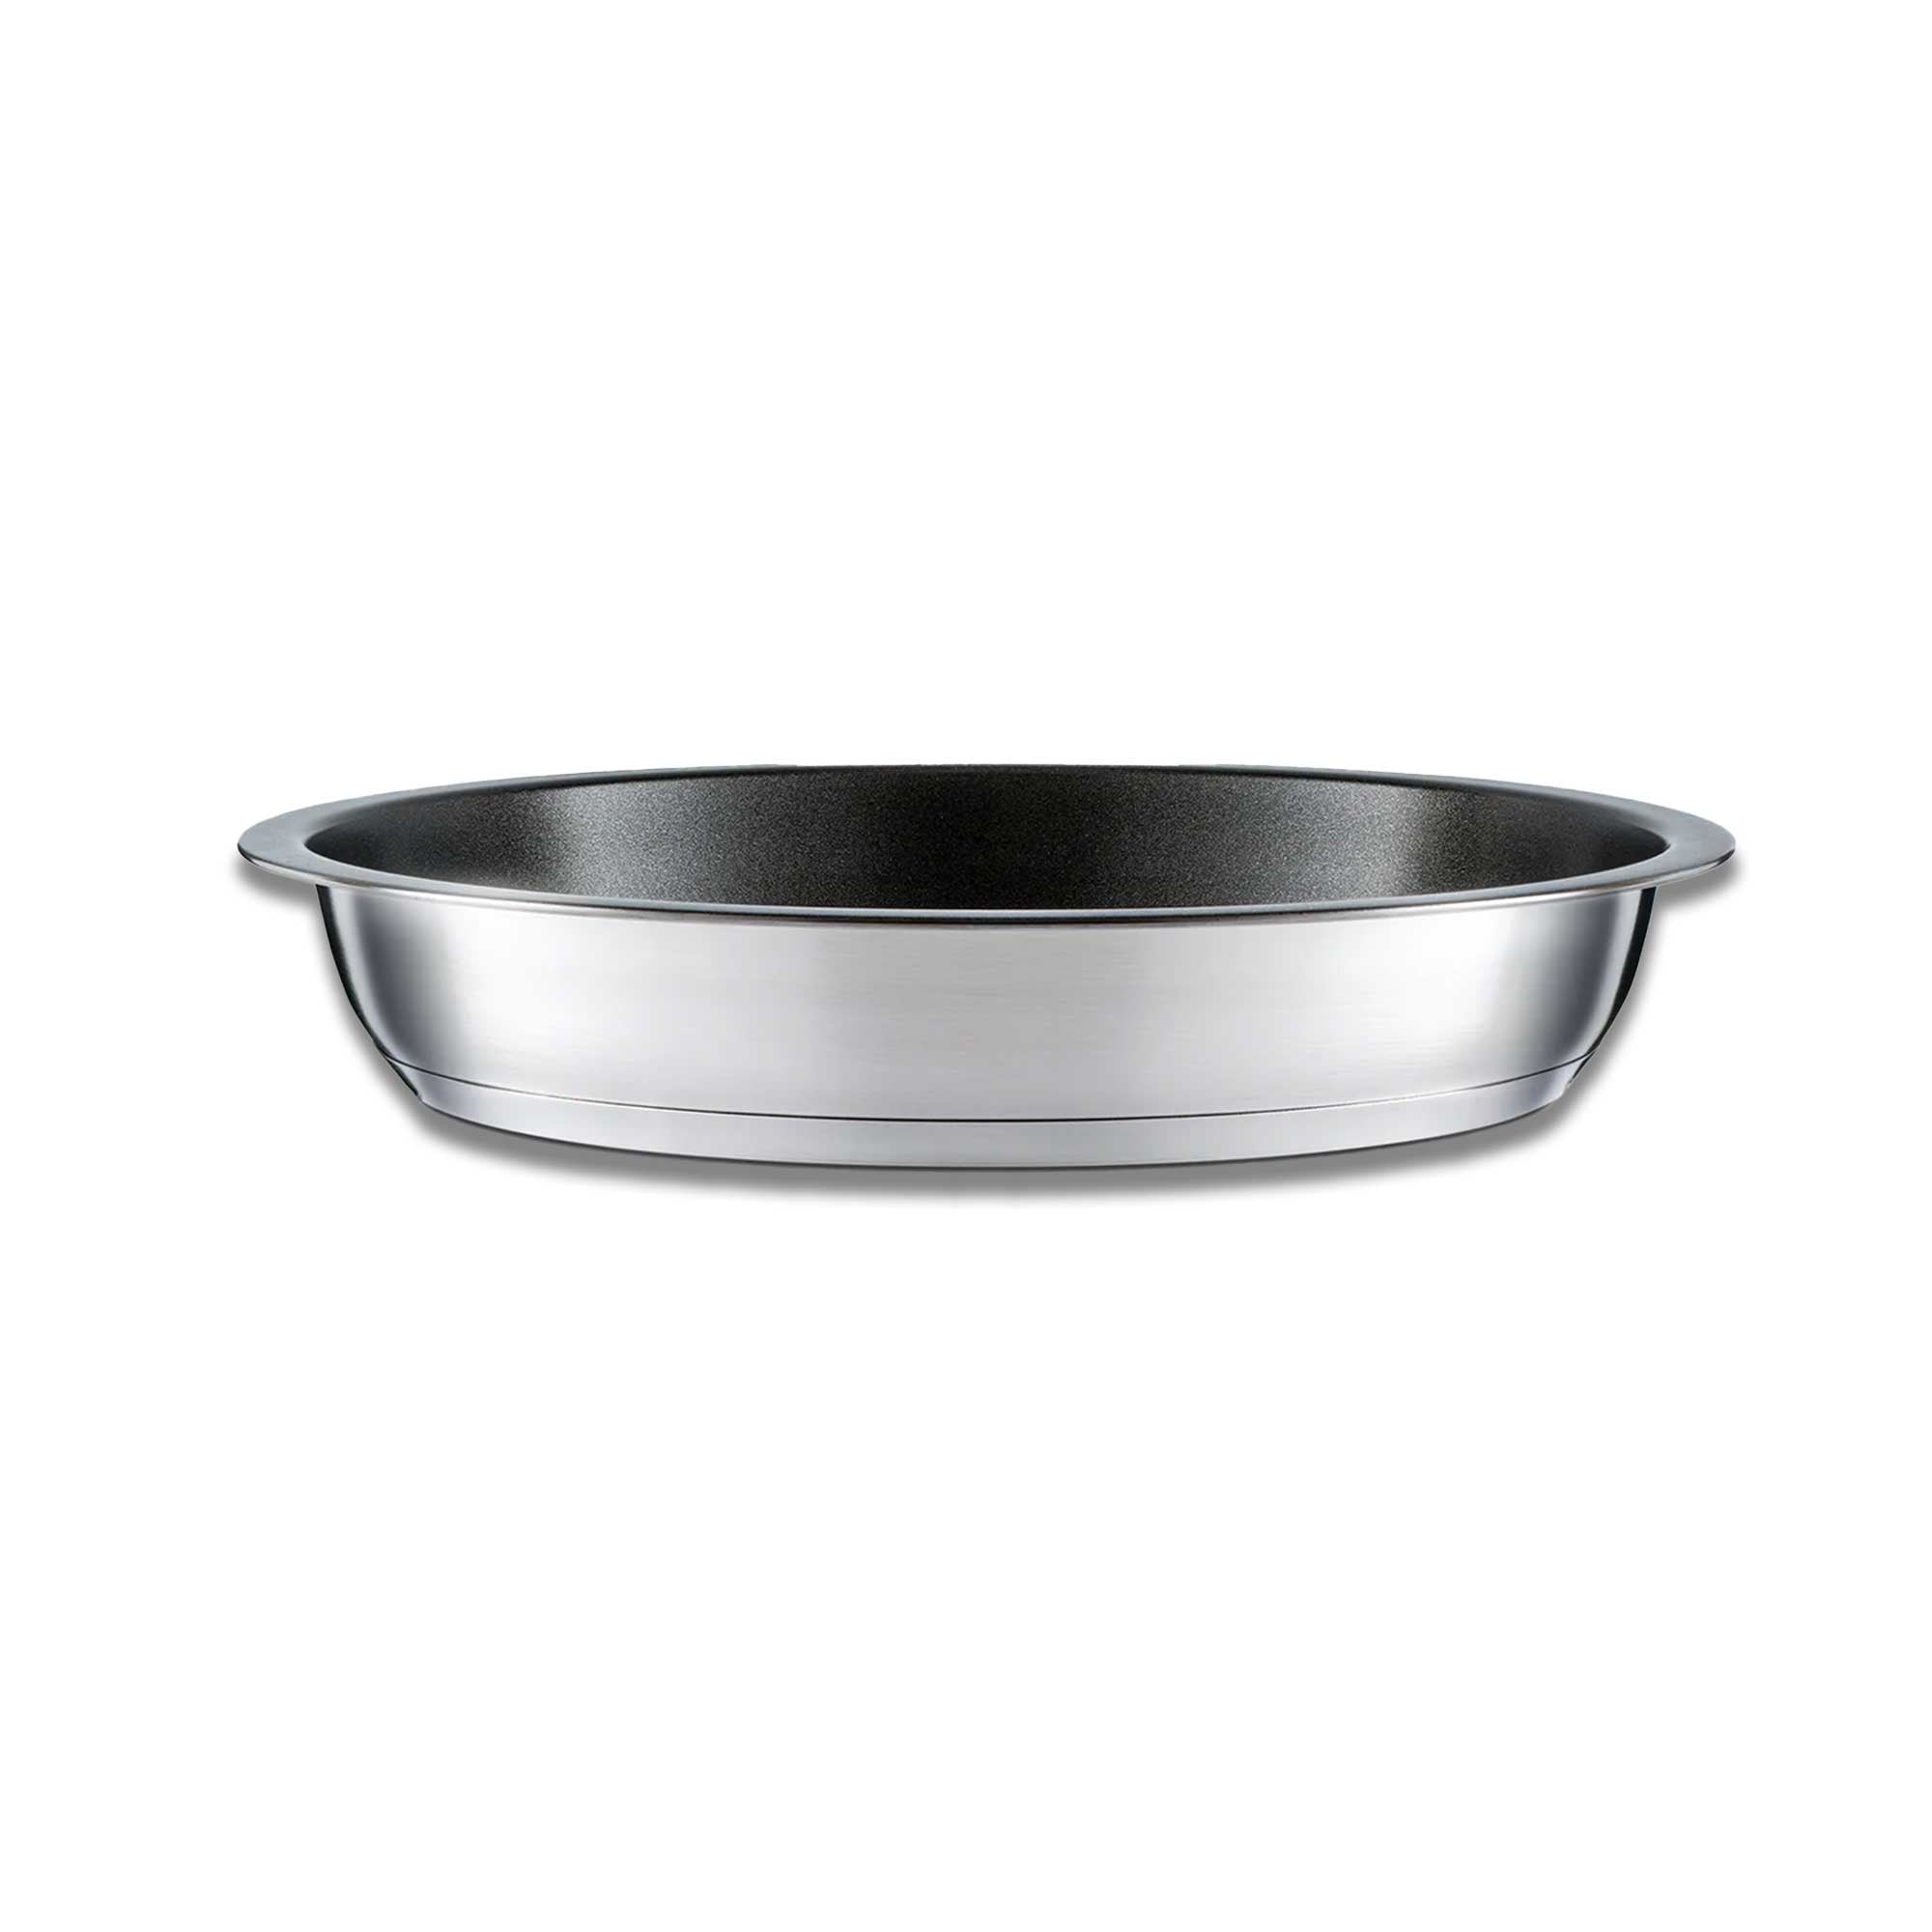 CookVision stainless steel pans